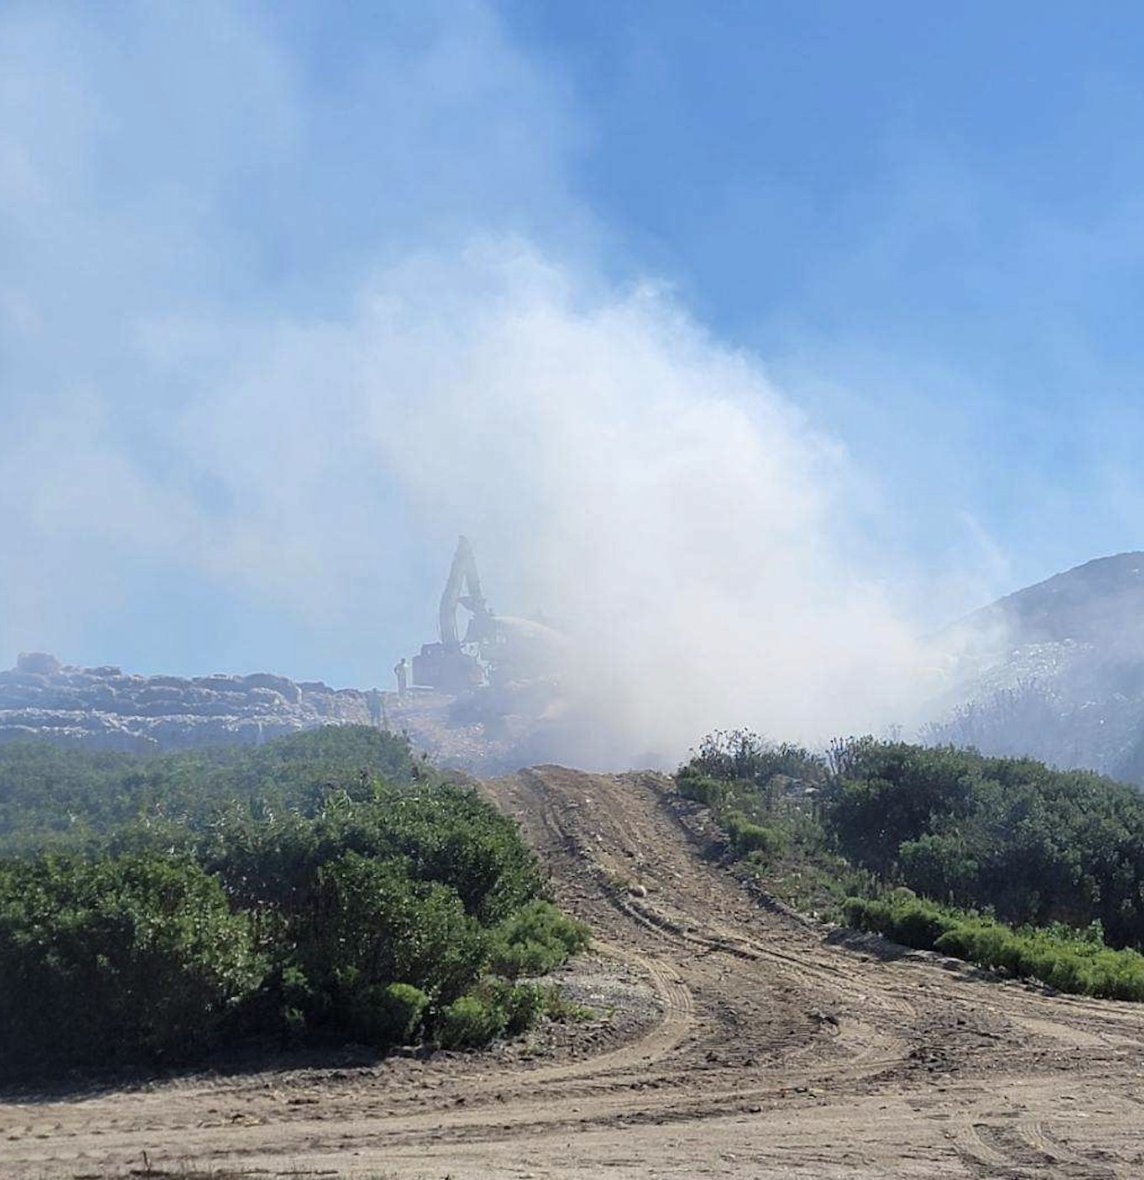 Fire broke out on the plastics hill of the Madaket landfill Thursday afternoon. It was put out after about an hour.